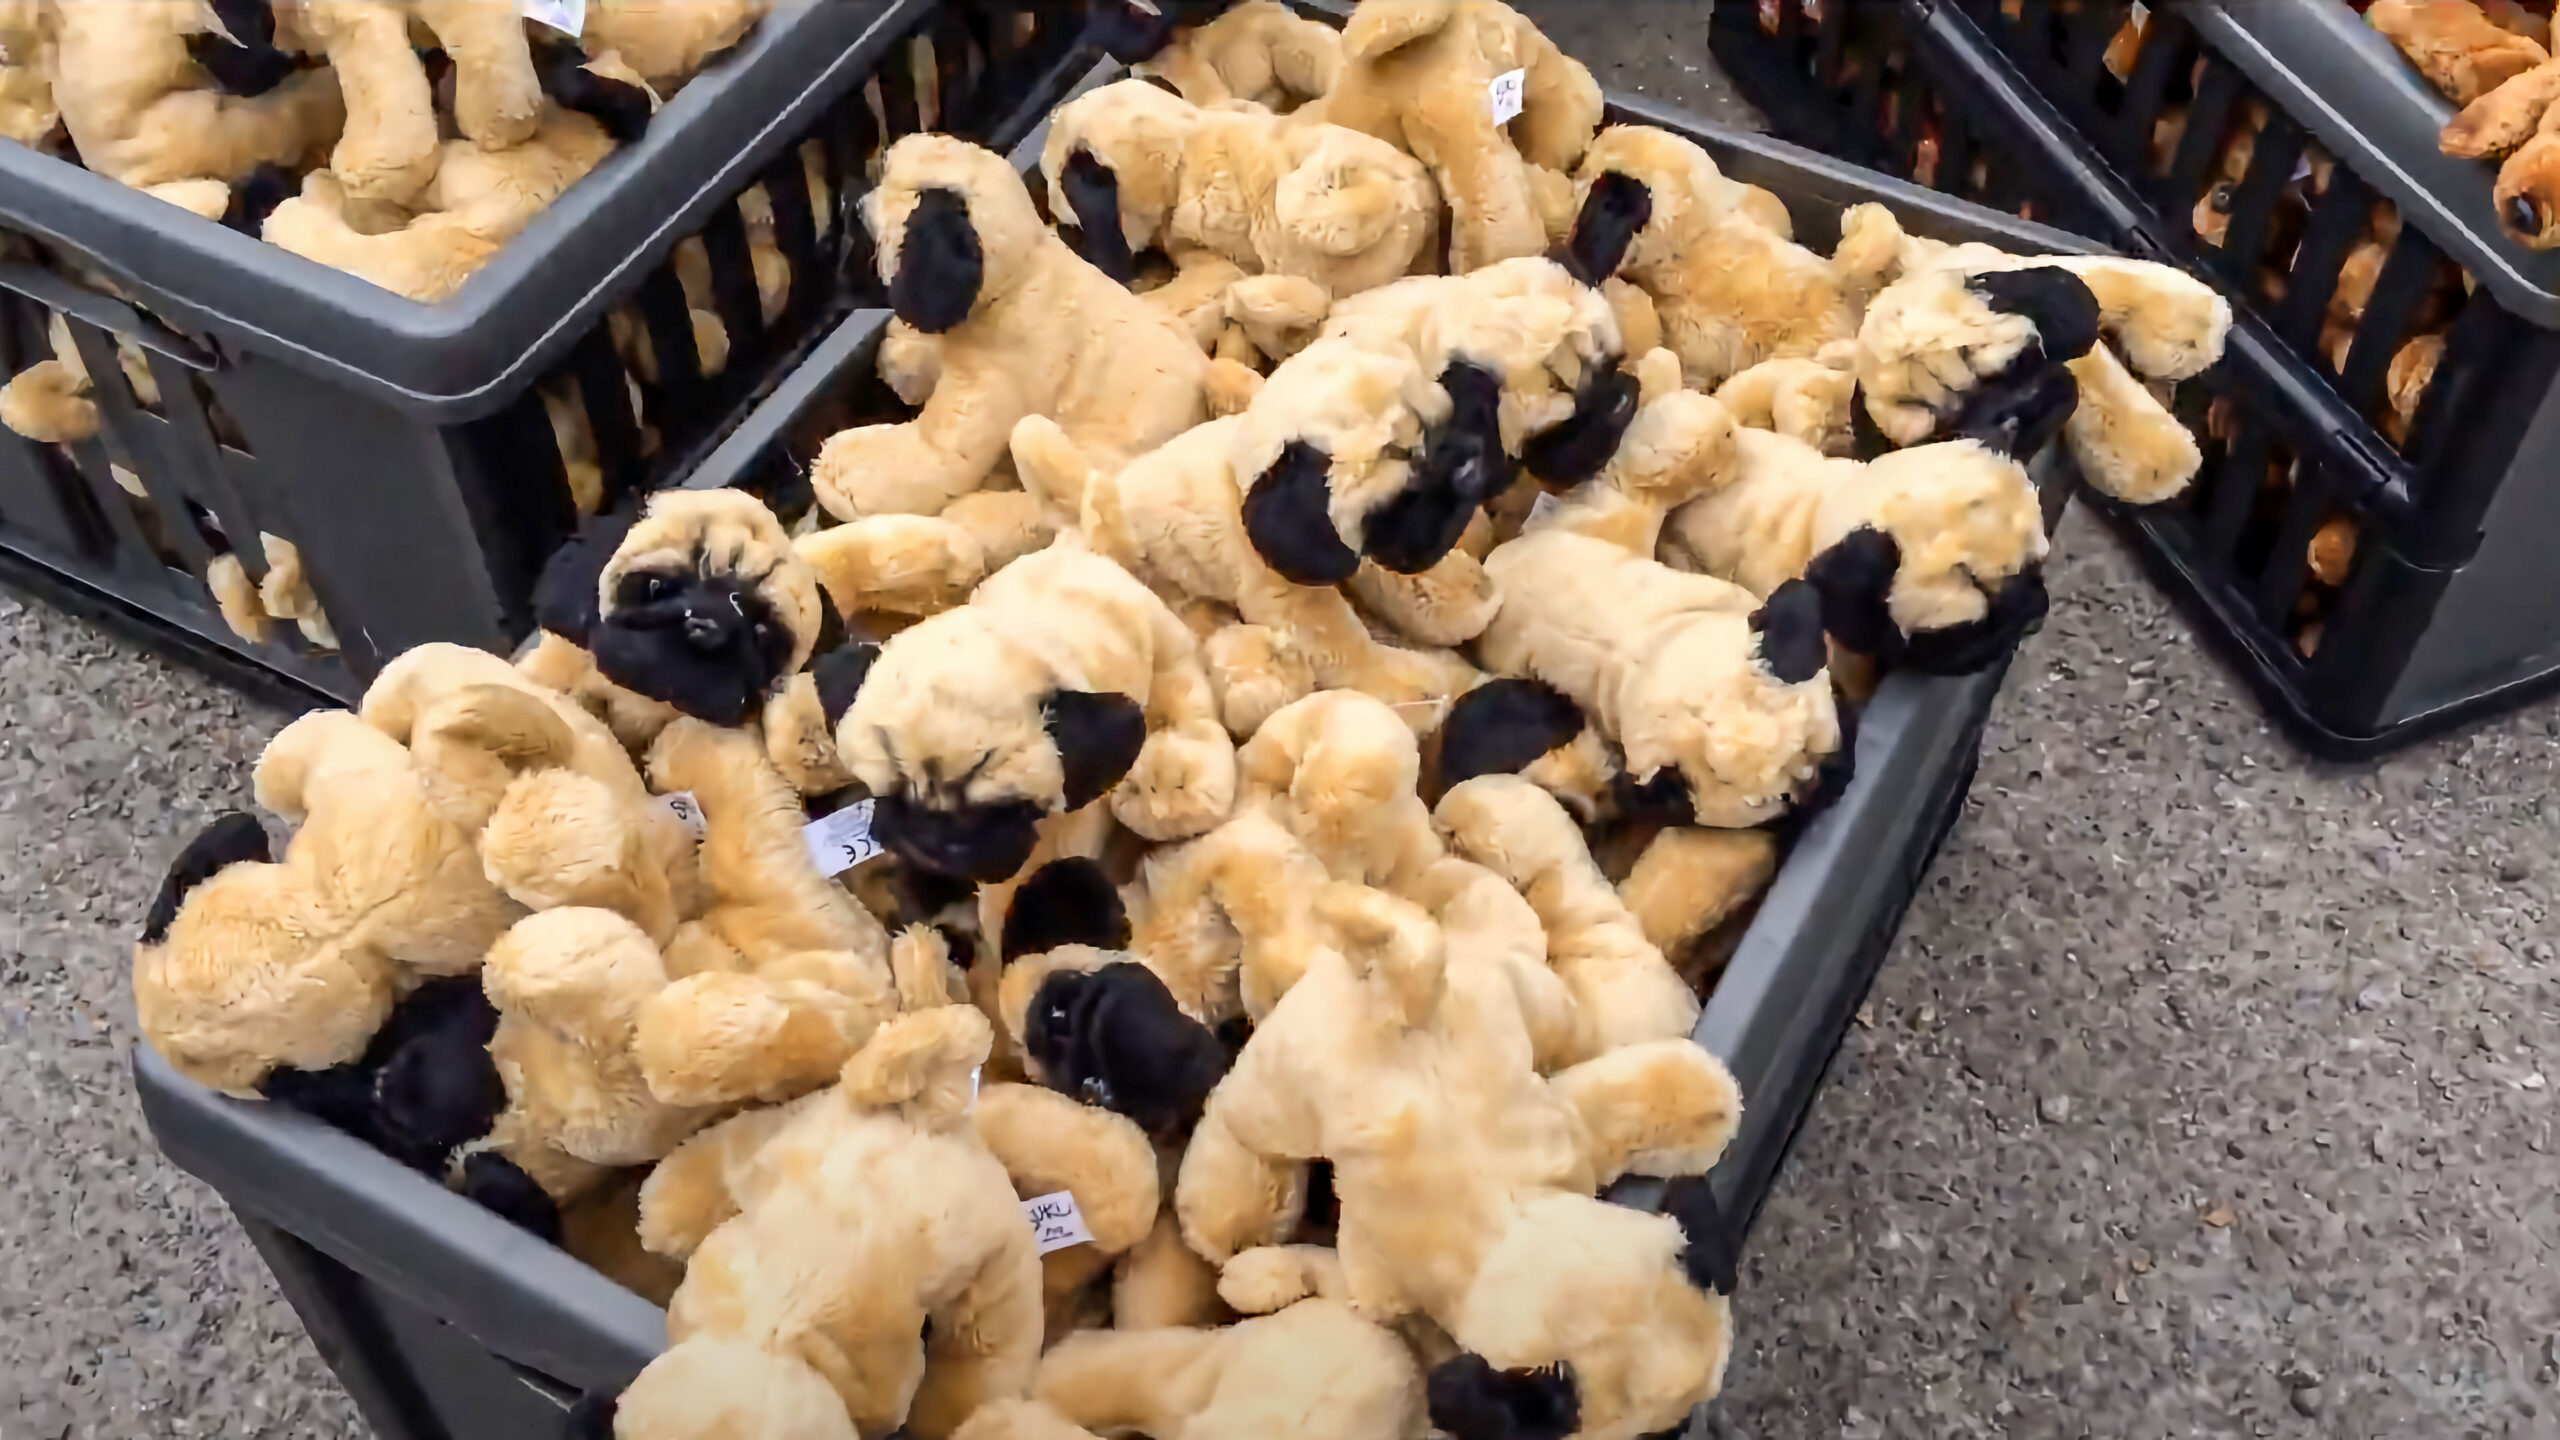 Dogs trust plush toy puppies in container